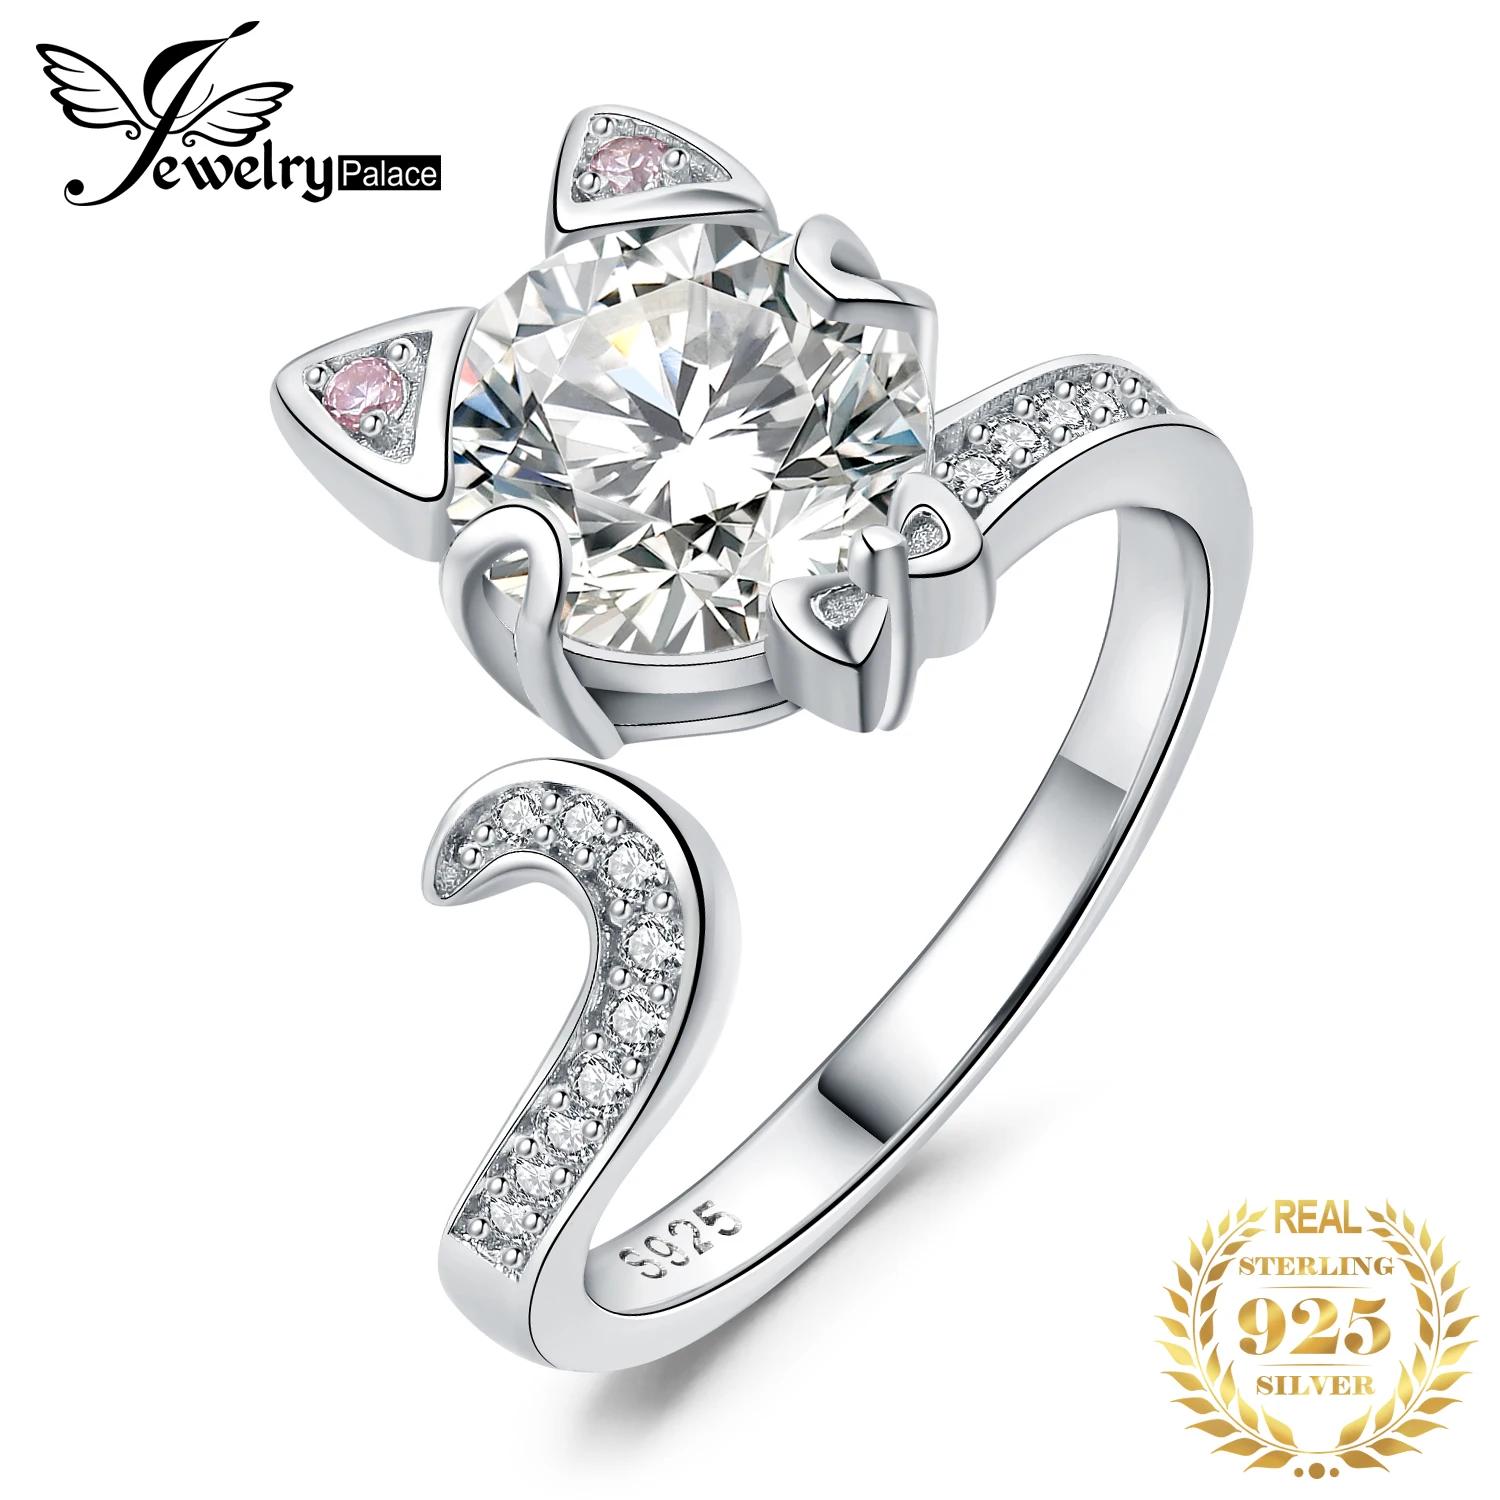 JewelryPalace  Ϳ ,  Ĺ,  , ,   , м, 3ct